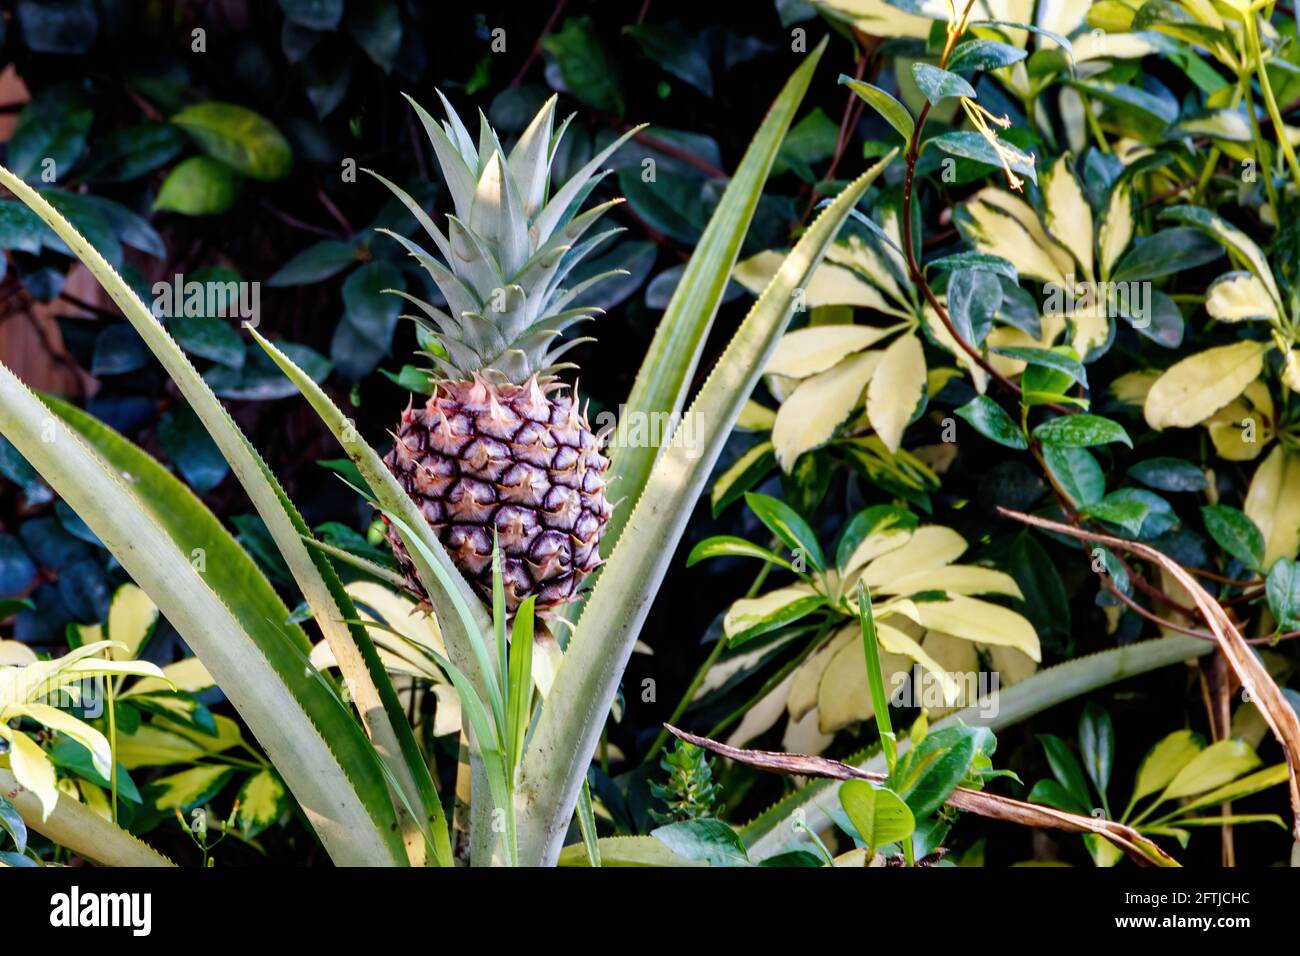 Growing pineapple aka Ananas comosus tropical plant from the Bromeliaceae family. South American cultivated in Palm Beach Florida near Broward County, Stock Photo